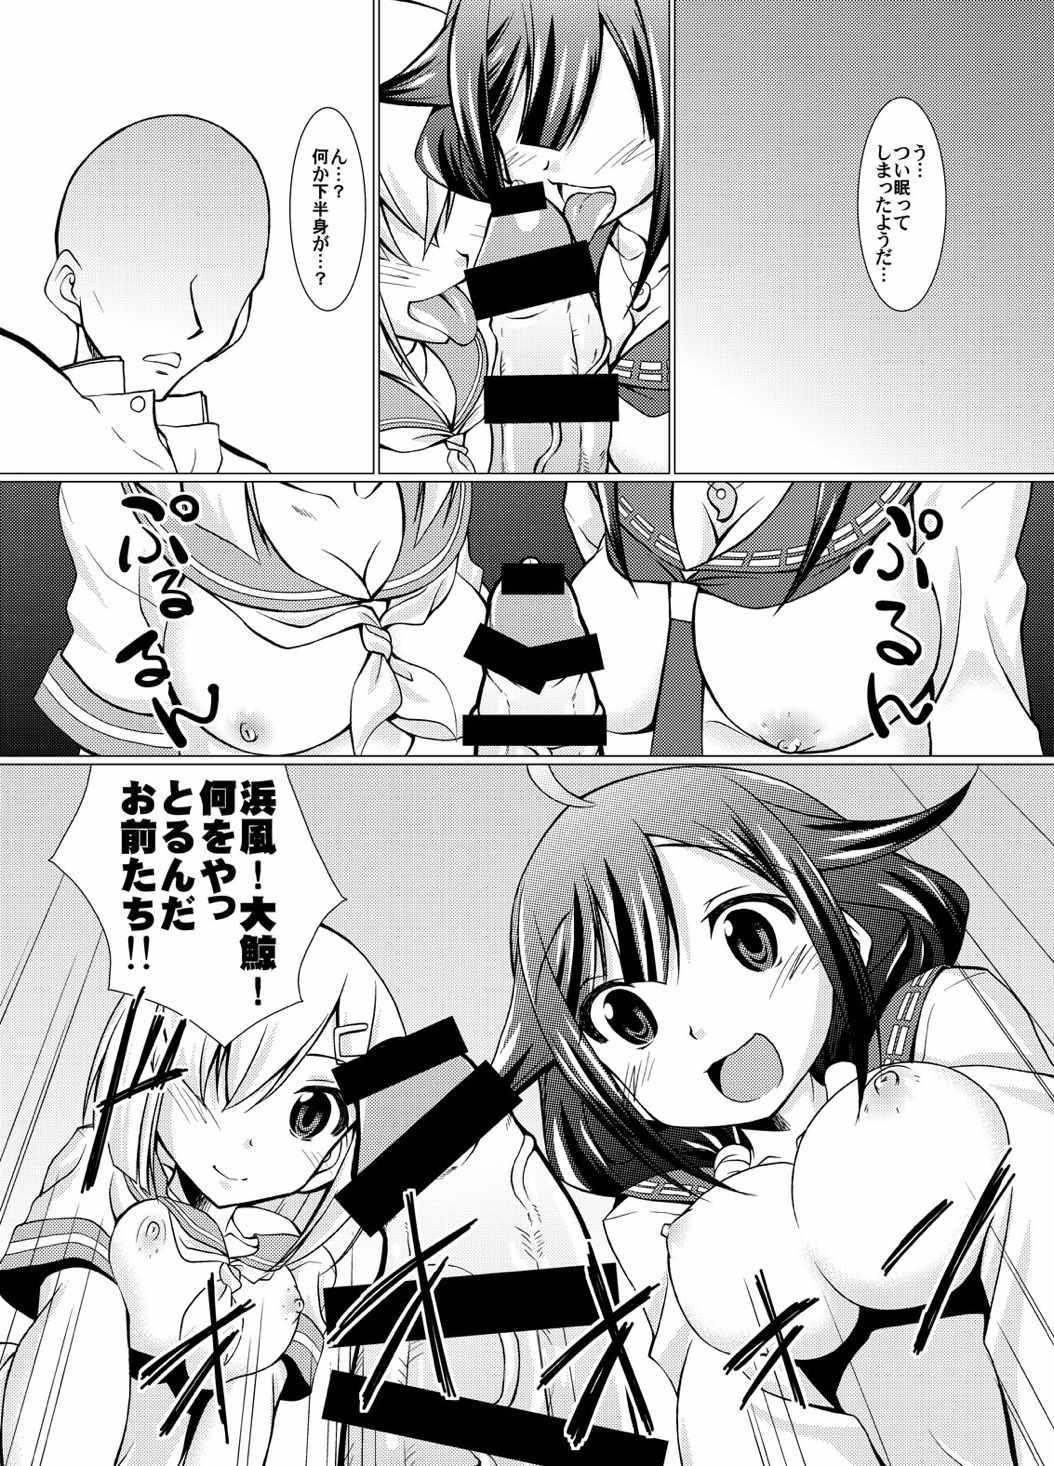 Muscles Punikan! - Kantai collection Cowgirl - Page 2